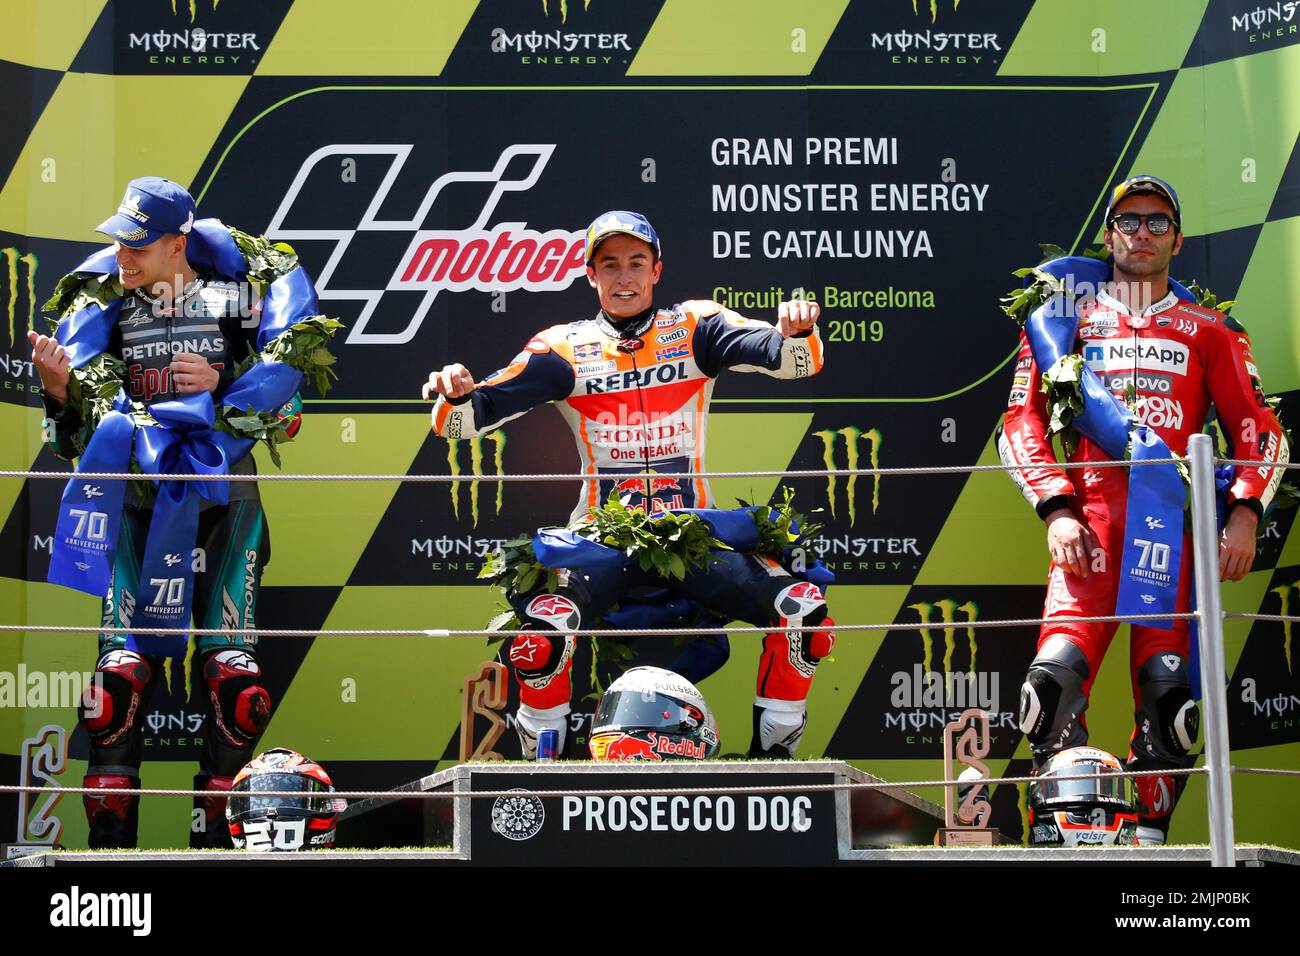 MotoGP Honda rider Marc Marquez of Spain, center, celebrates after winning  the Catalunya Motorcycle Grand Prix alongside 2nd placed Fabio Quartararo  of France, left and 3rd placed Danilo Petrucci of Italy at